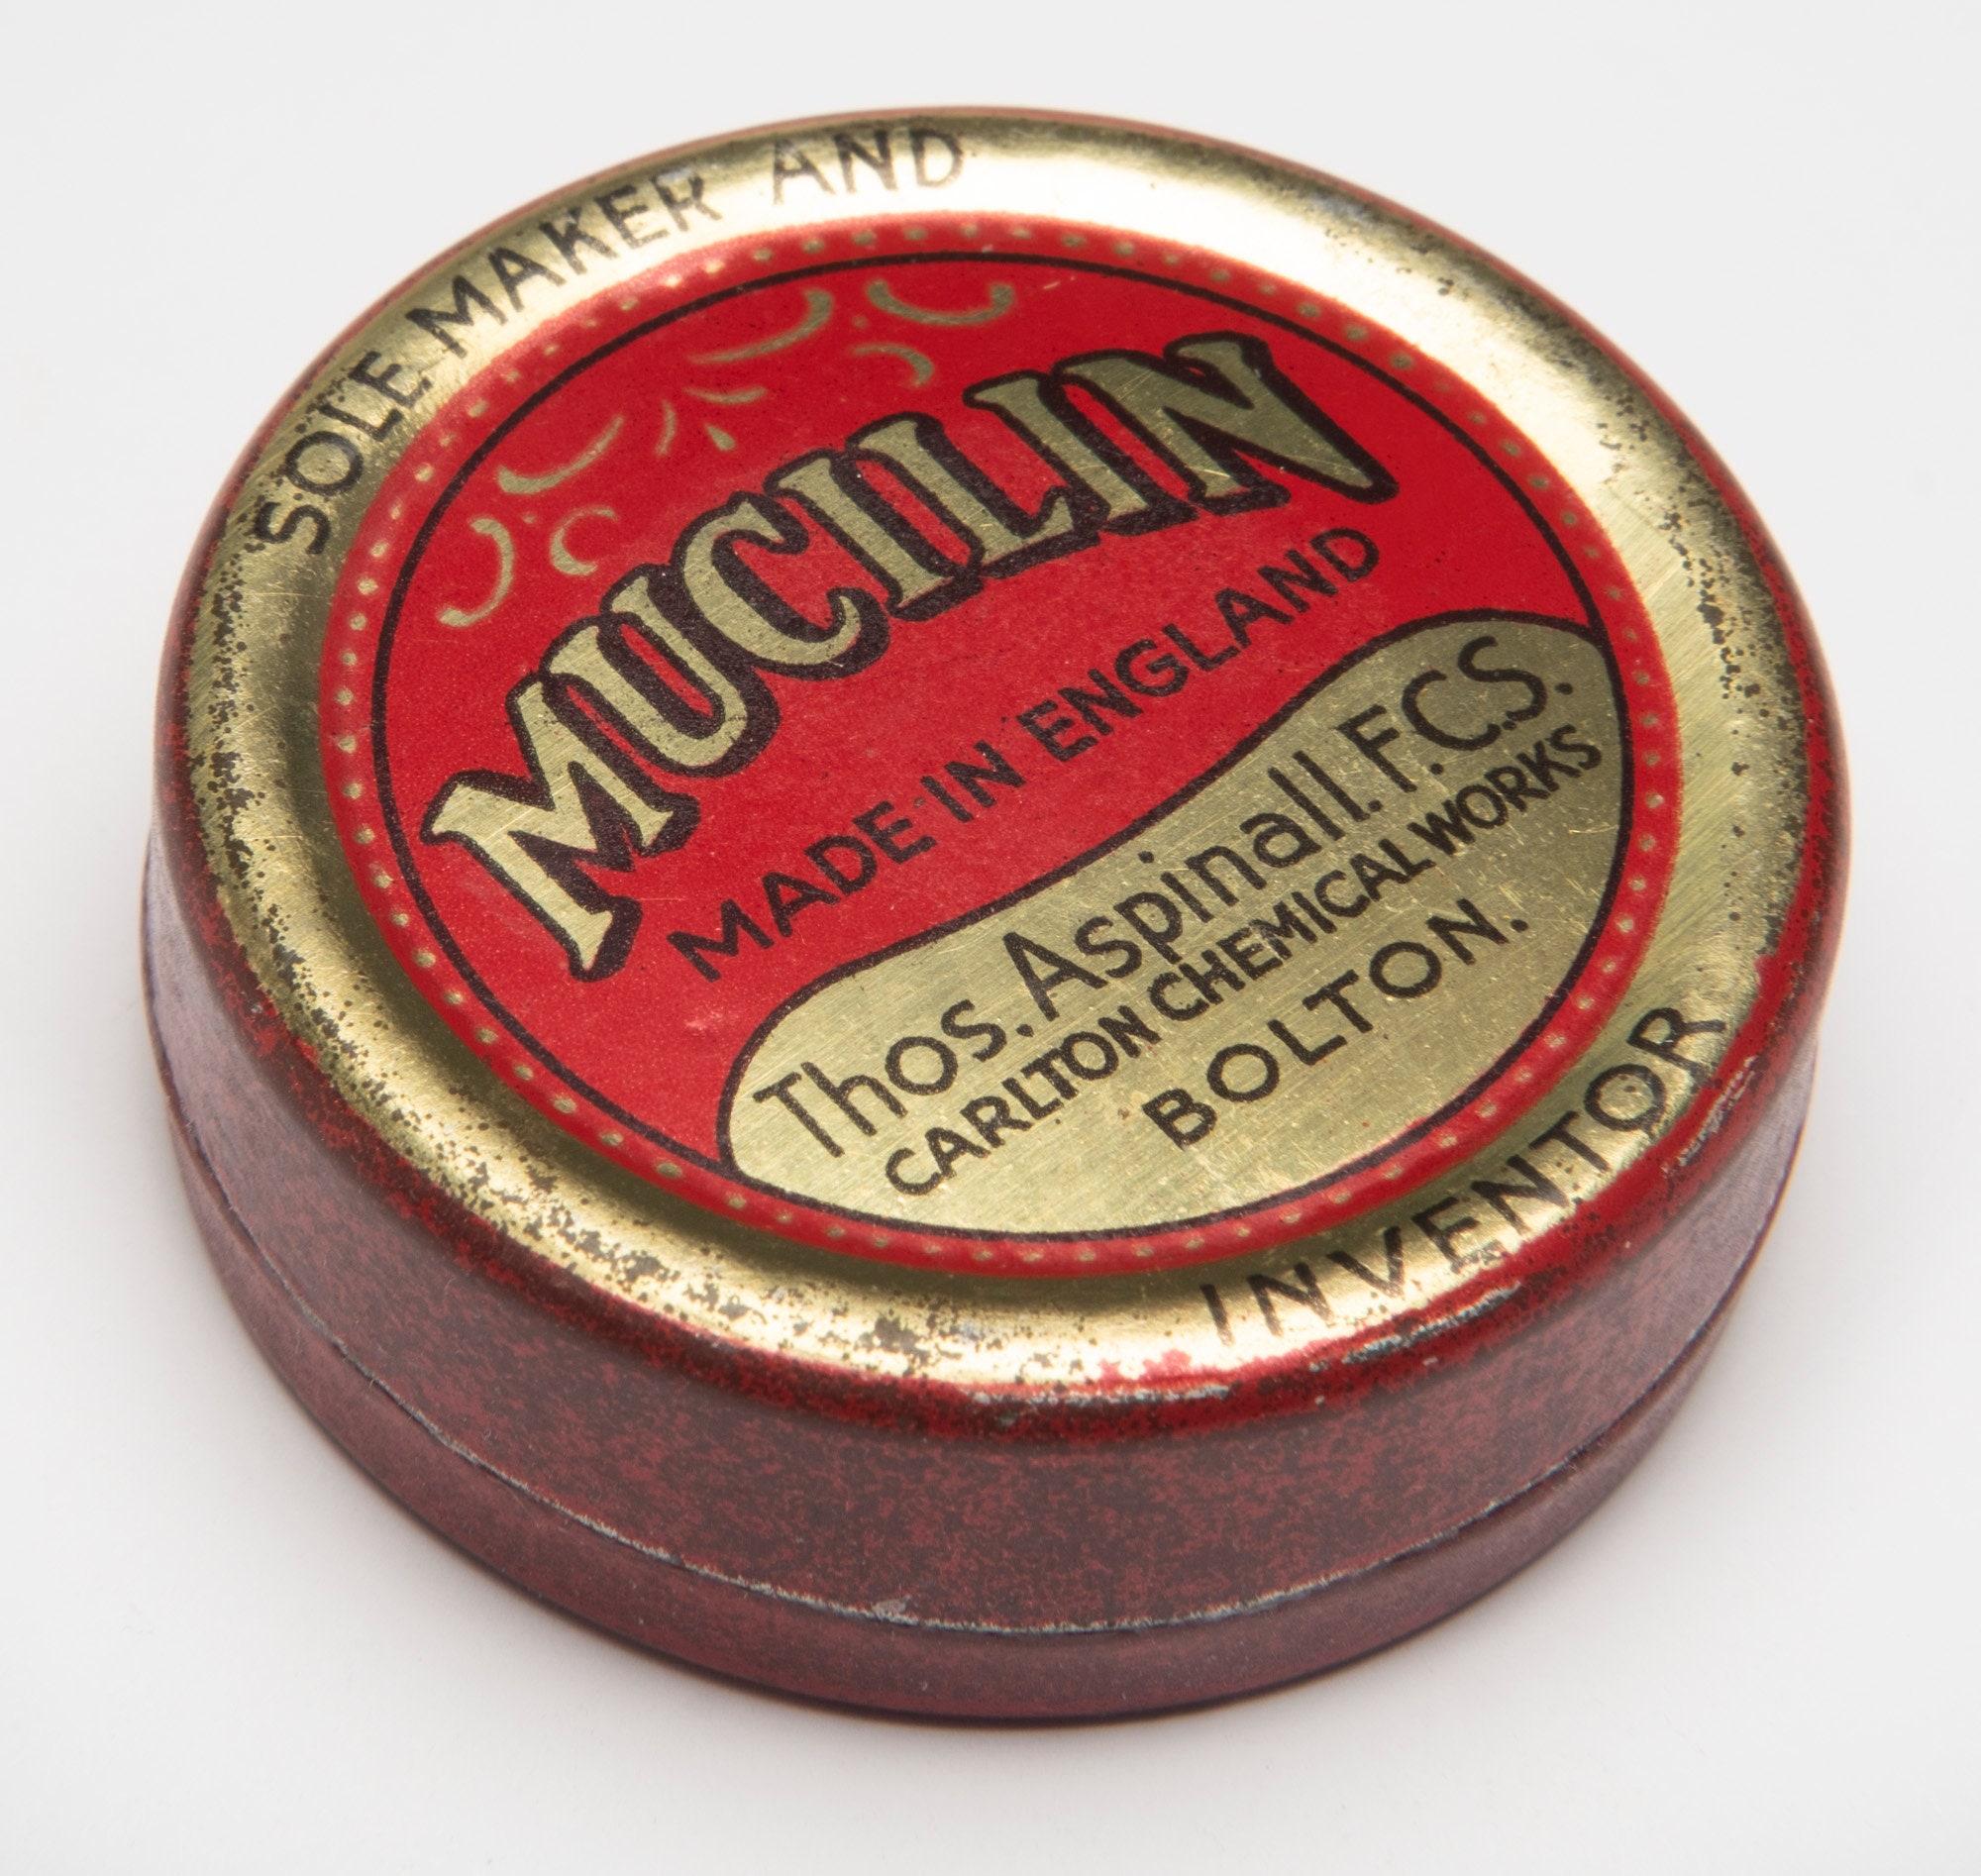 ANTIQUE VINTAGE MUCILIN OLD THOS ASPINALL LTD FLY FISHING LINE WAX